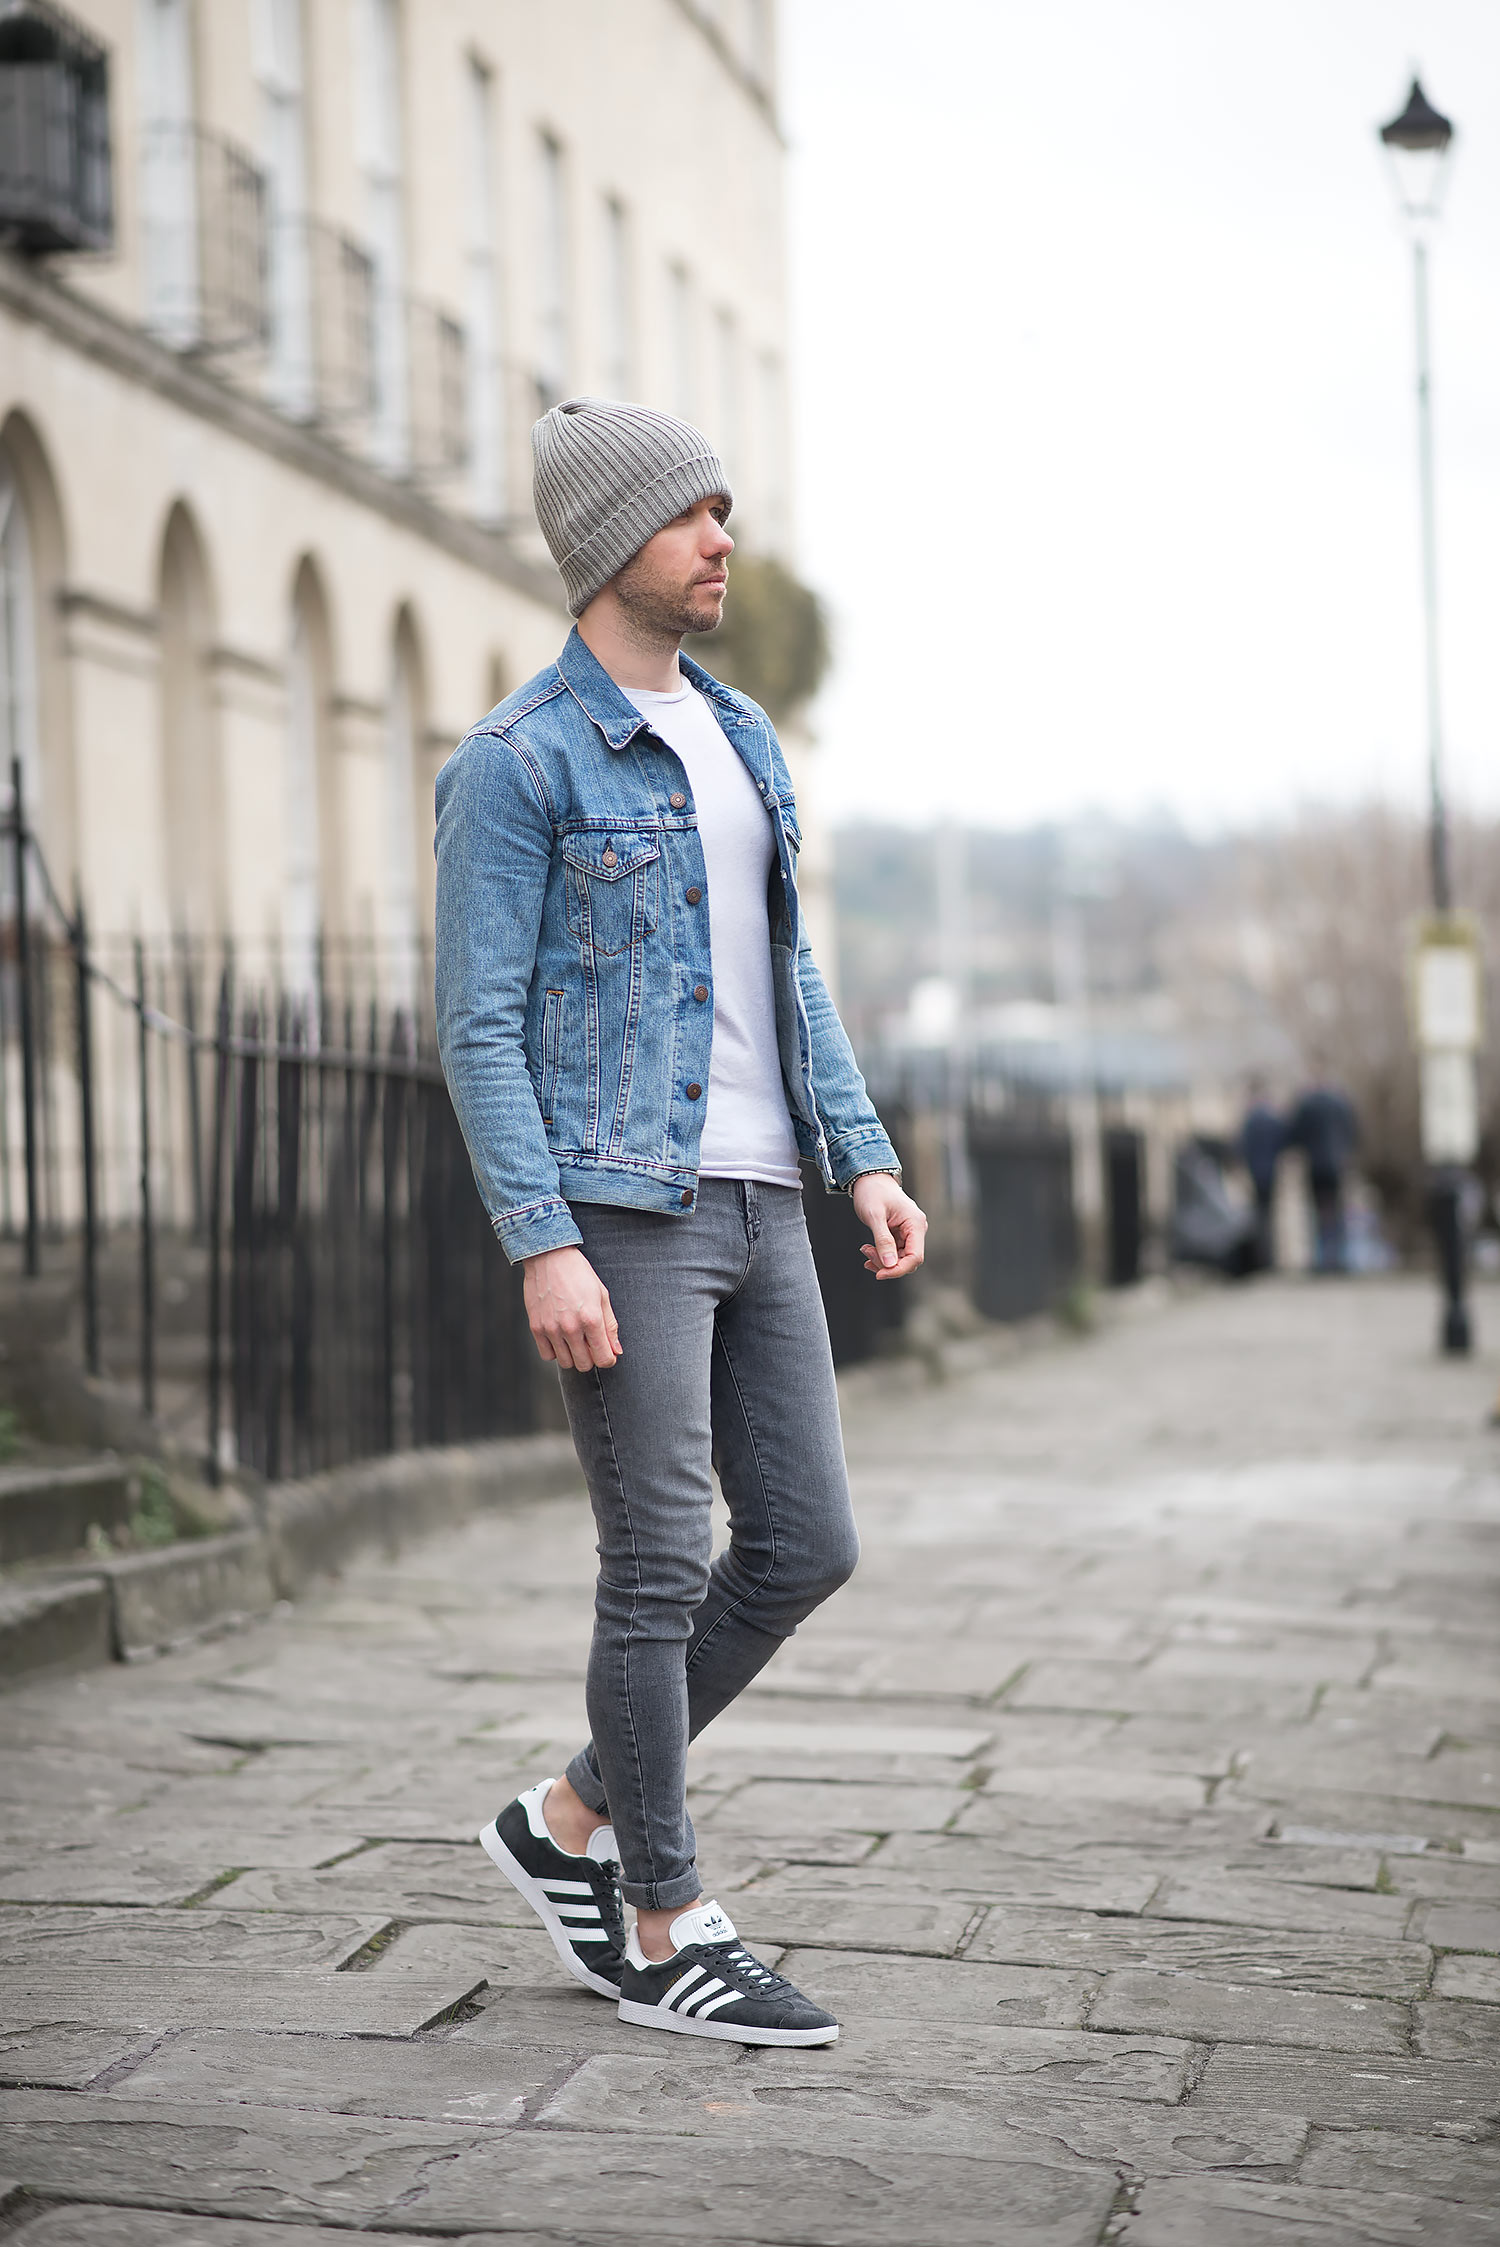 Levis Icy Trucker Jacket And Adidas Charcoal Gazelle Outfit - Your Average Guy